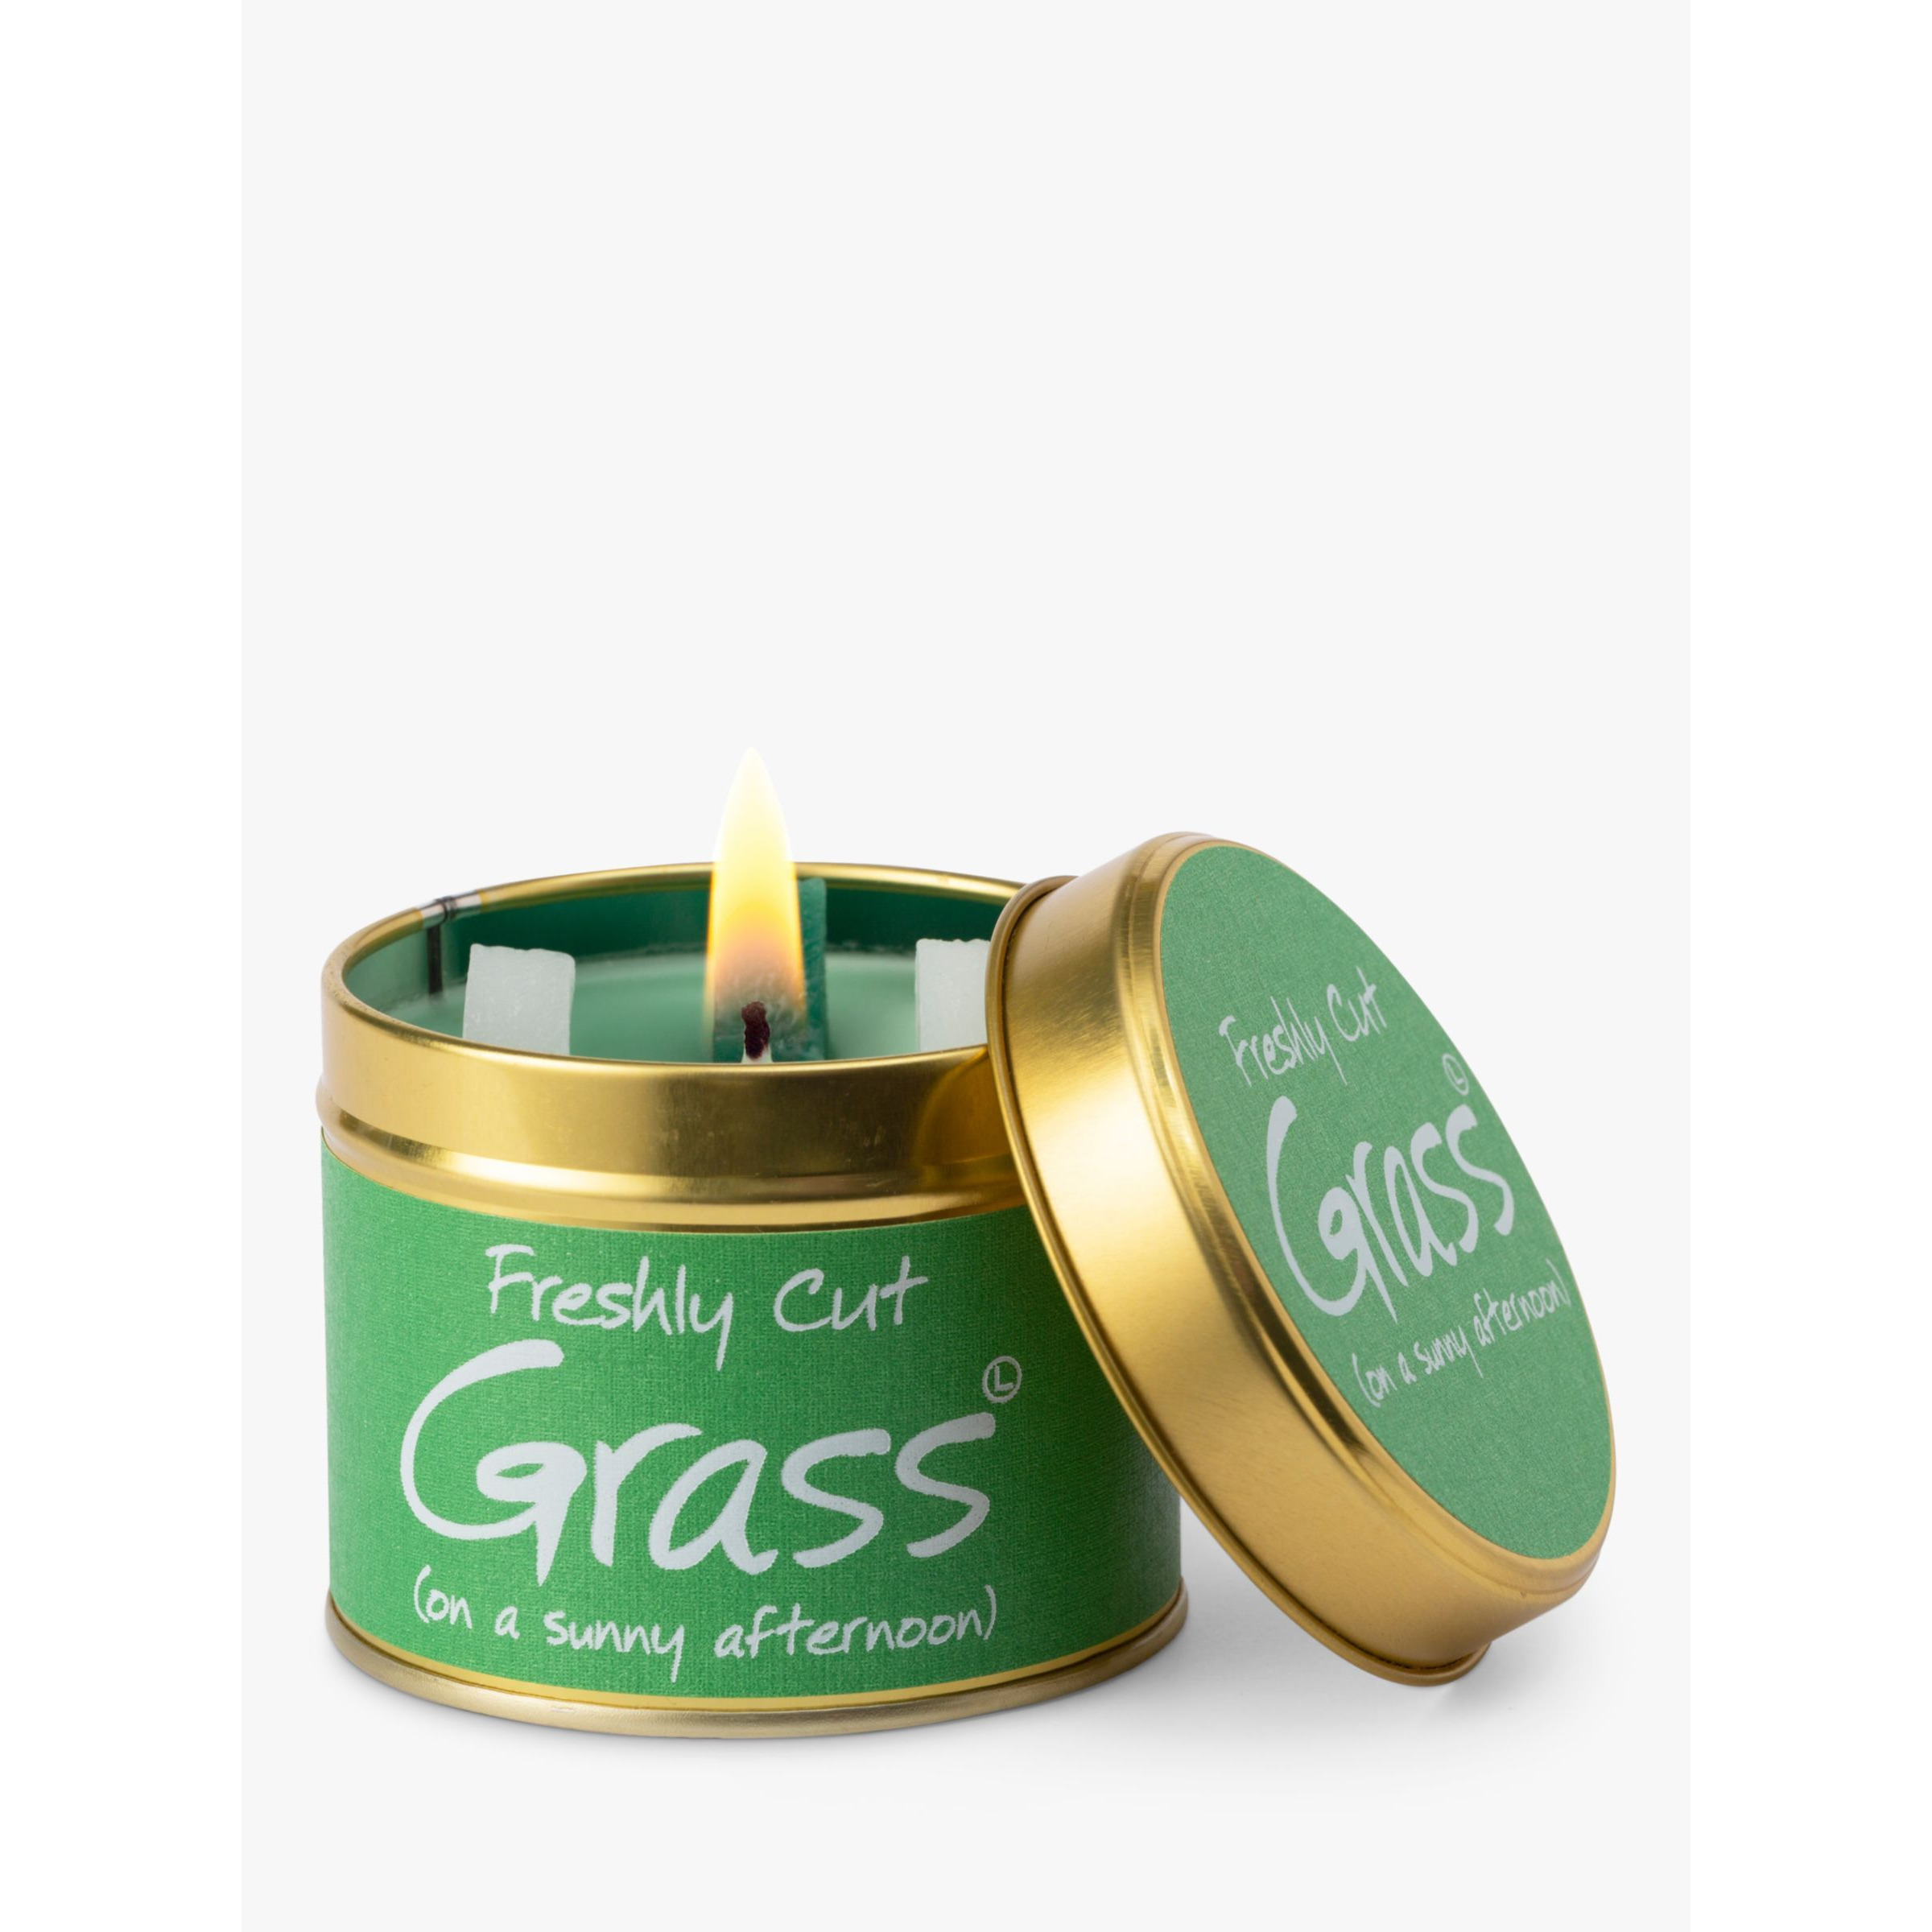 Lily-flame Freshly Cut Grass Tin Scented Candle, 250g - image 1